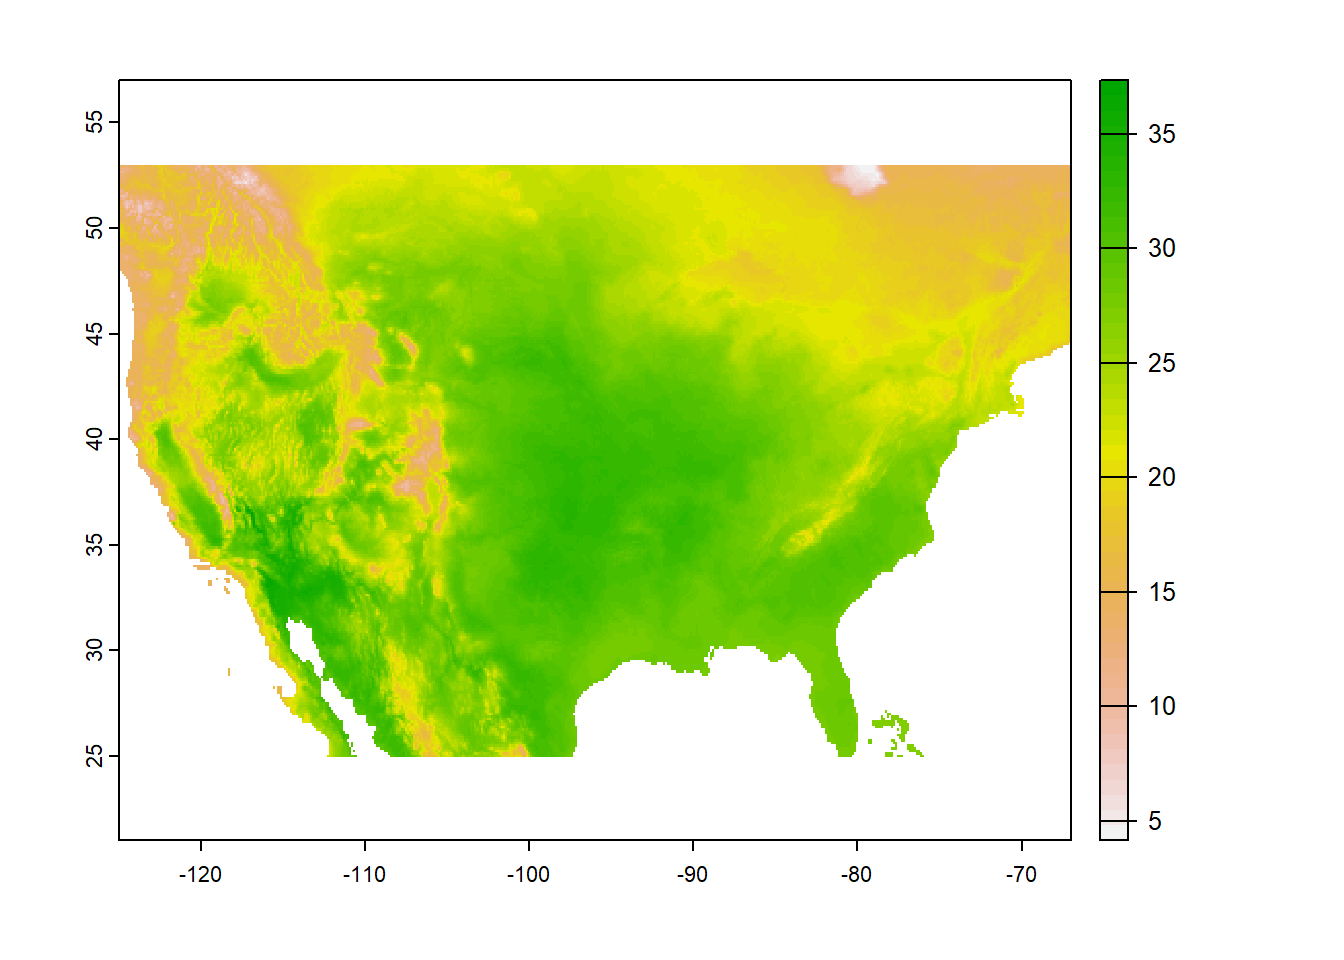 Raster map created with the generic plot method.